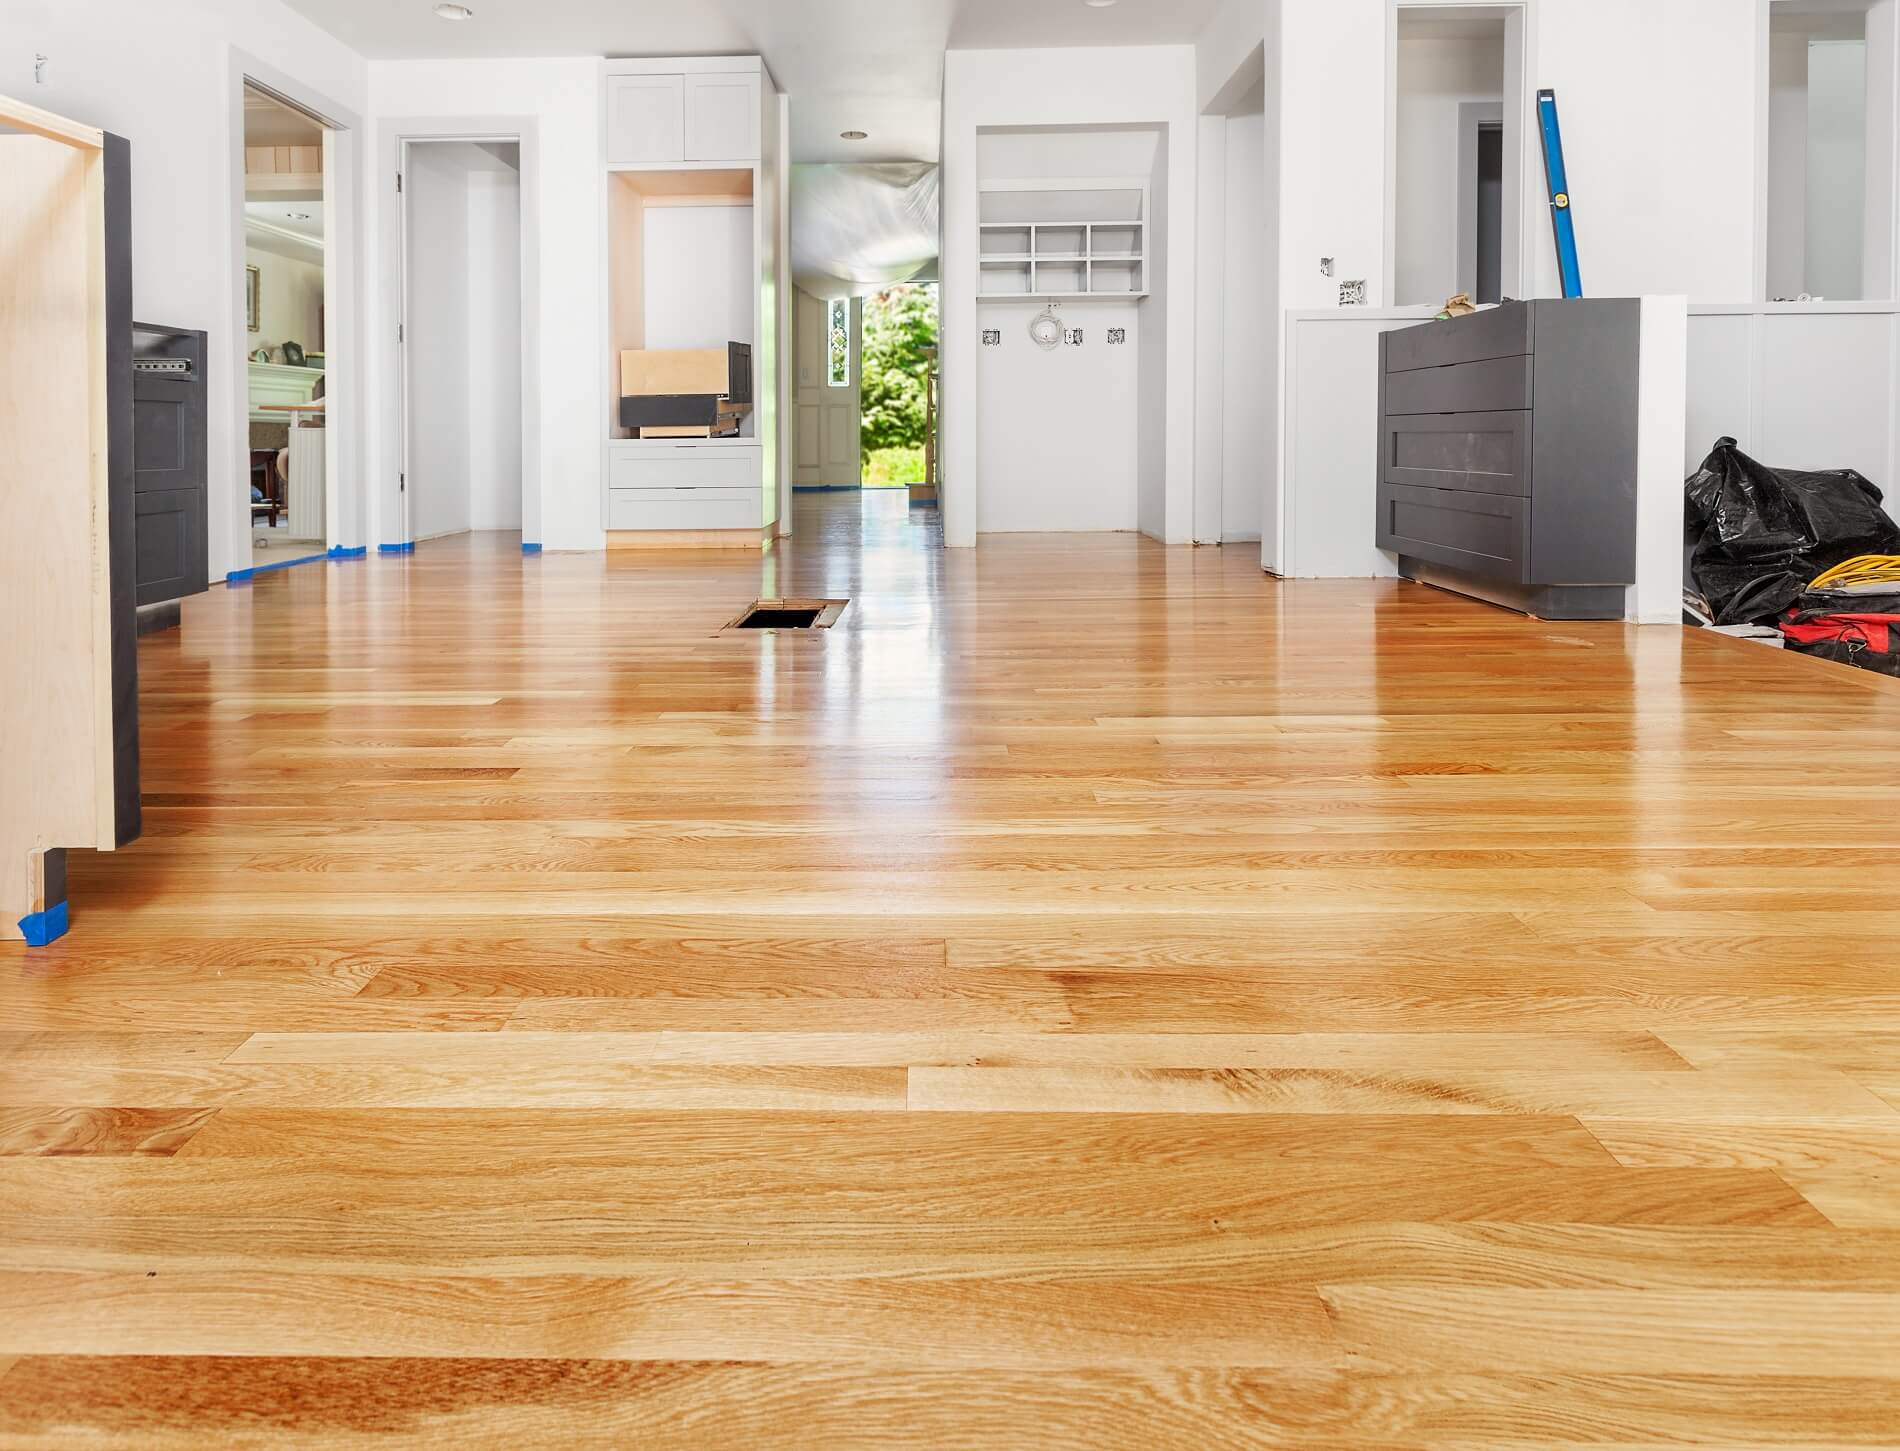 Wood Floor Cleaning Services Shiny, Hardwood Floor Cleaning Services Fredericksburg Va